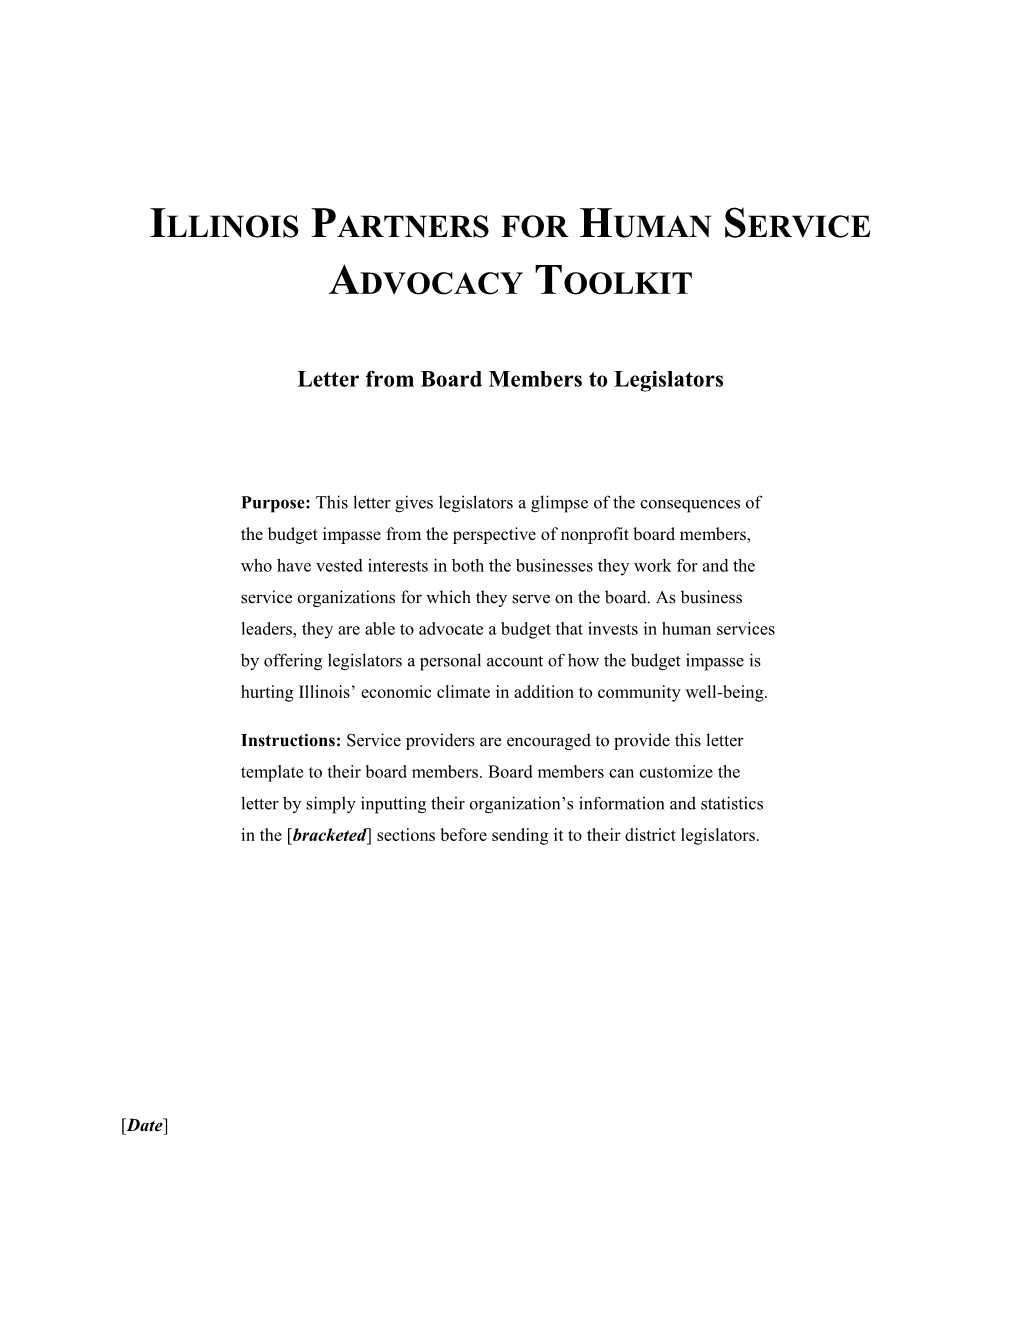 Illinois Partners for Human Service